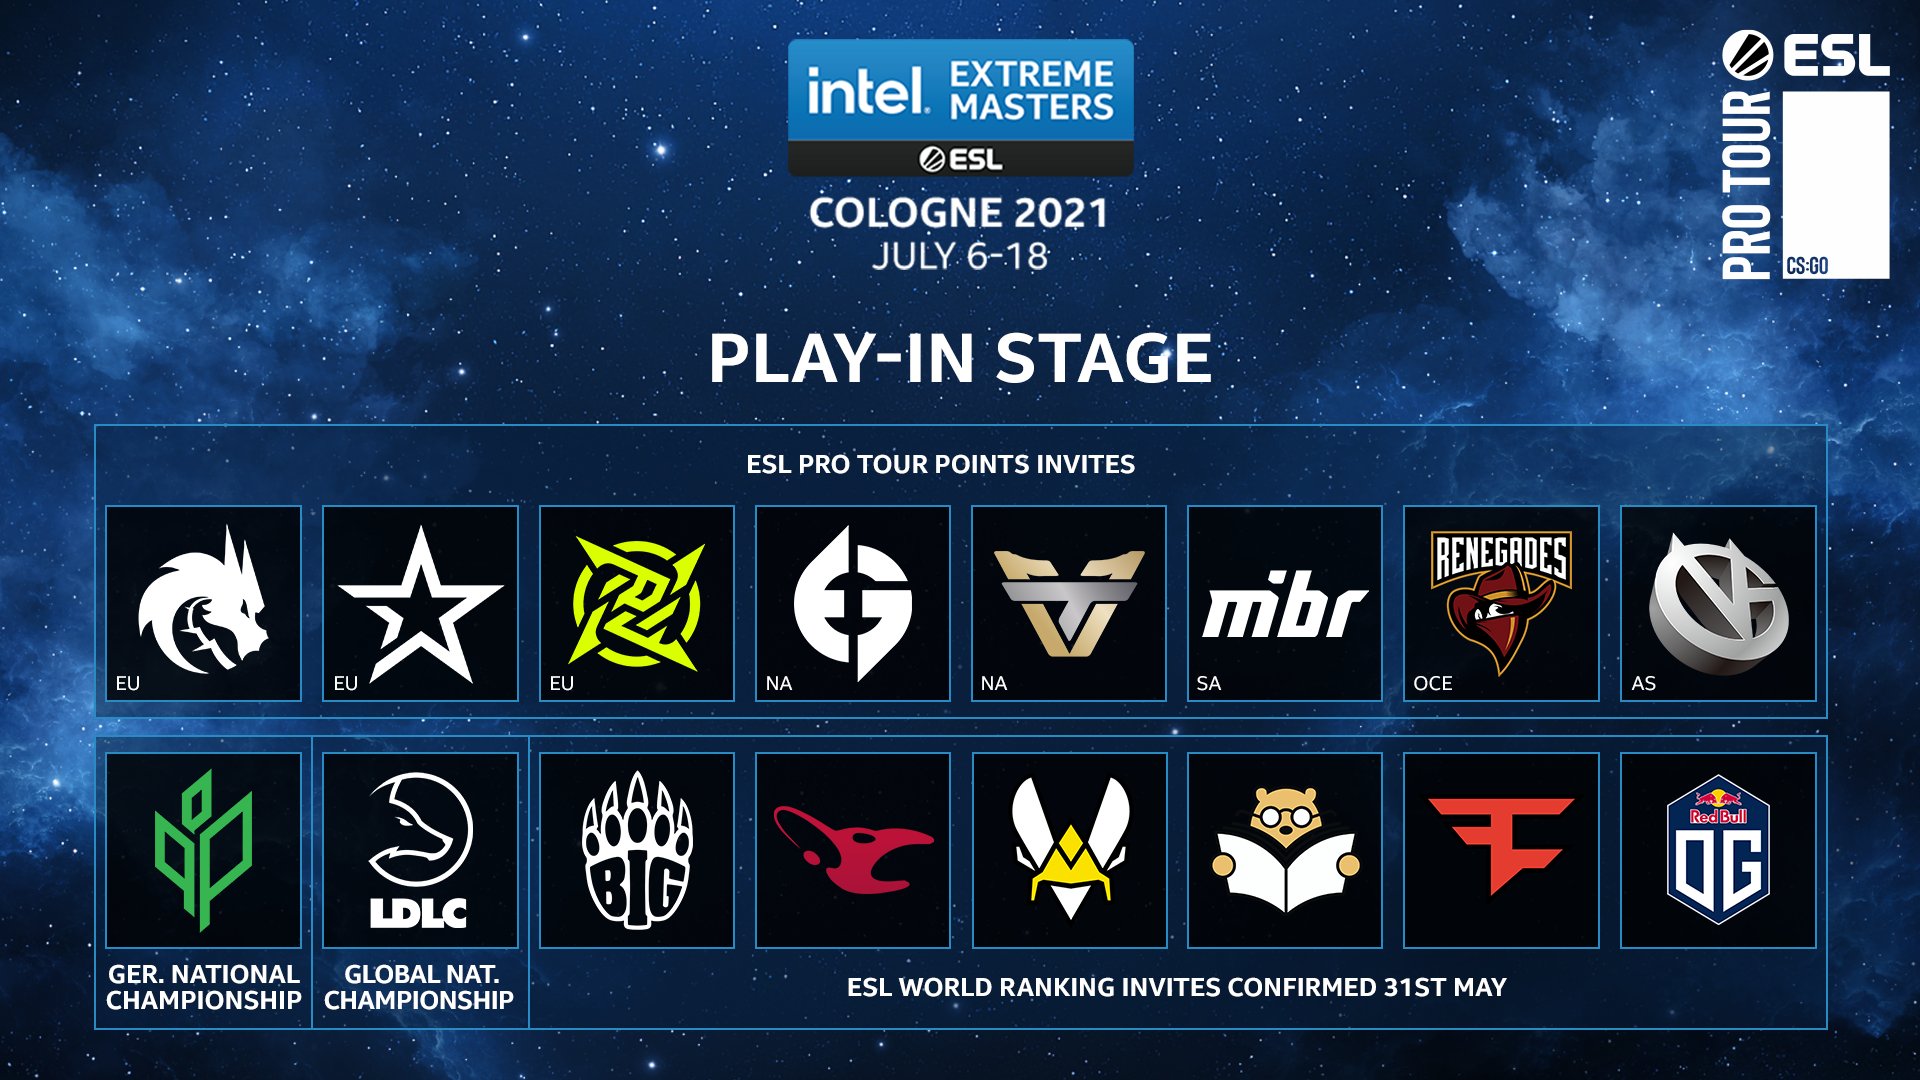 Esl Unveils Full Team List For Iem Cologne Play In Stage Dot Esports